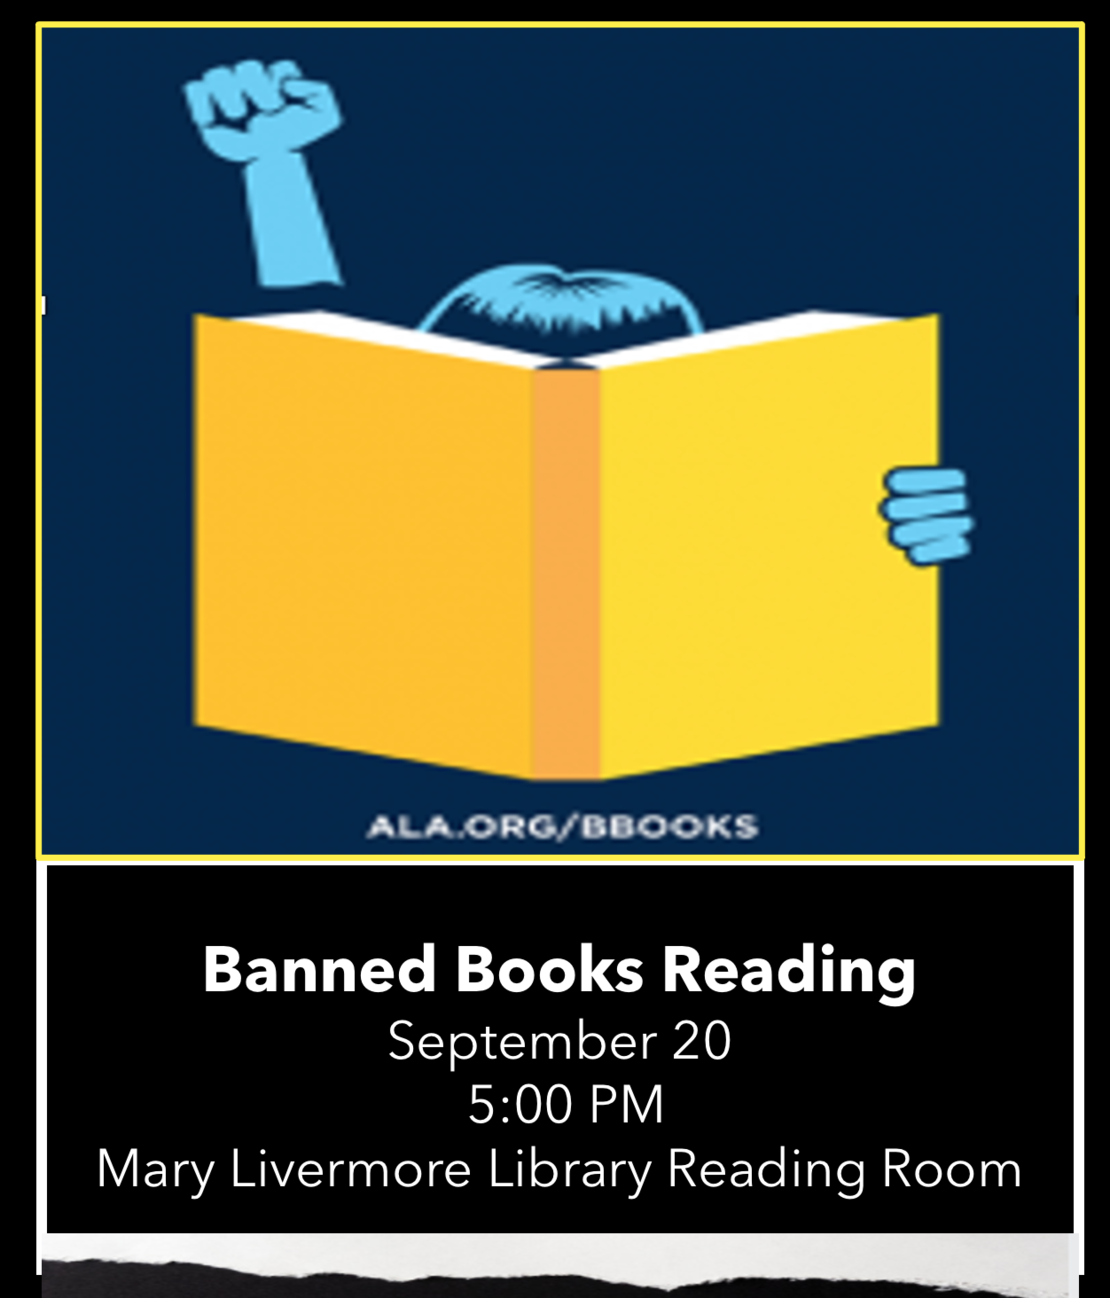 Banned Books Reading Sept. 20 5:00 PM Mary Livermore Library Reading Room